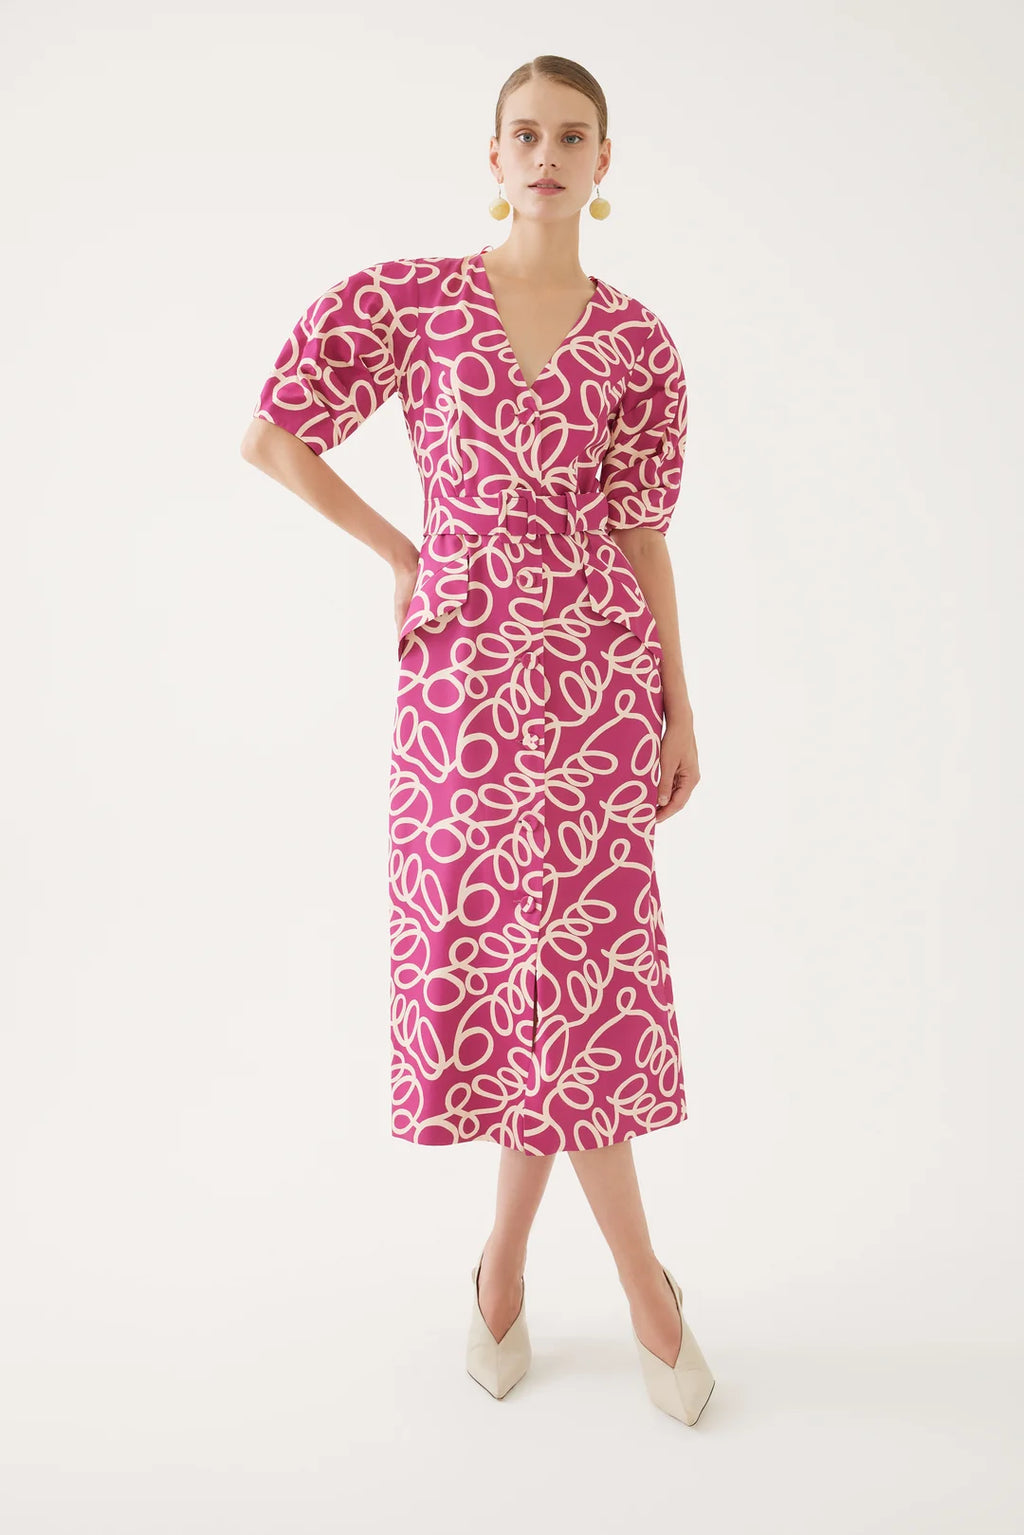 <p>Exquise swirl print button up dress in magenta with beige swirls</p>
<p>Product code 4218037</p>